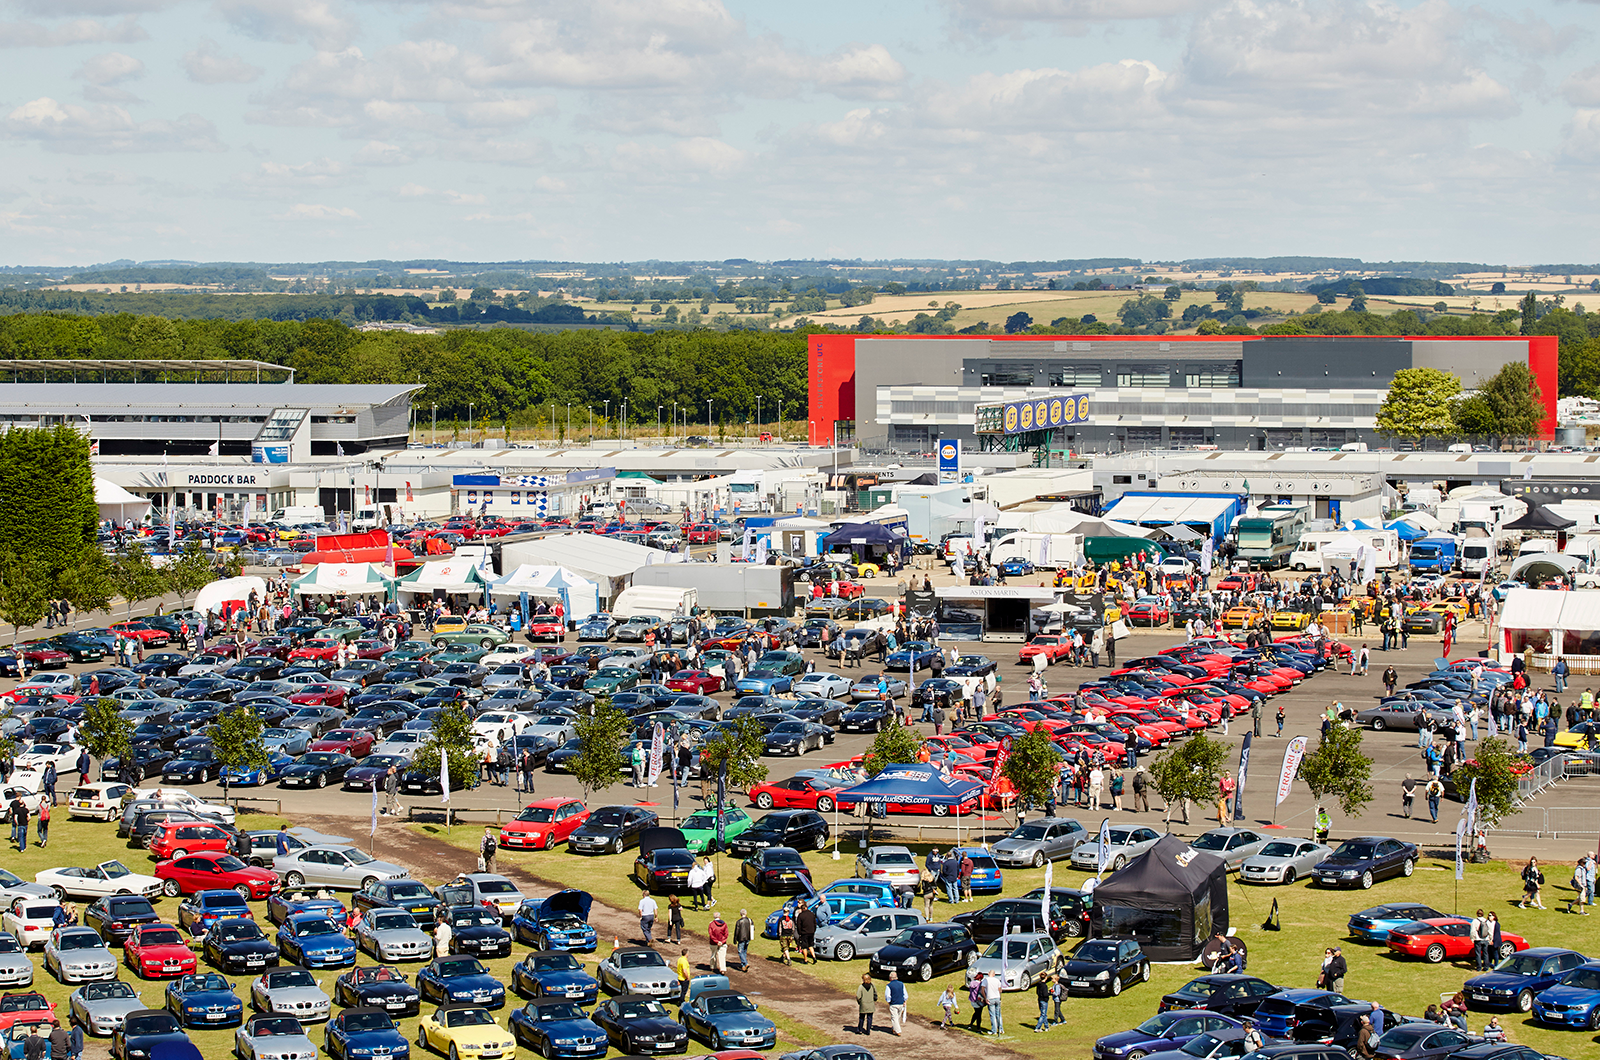 Classic & Sports Car – What not to miss at this weekend’s Silverstone Classic